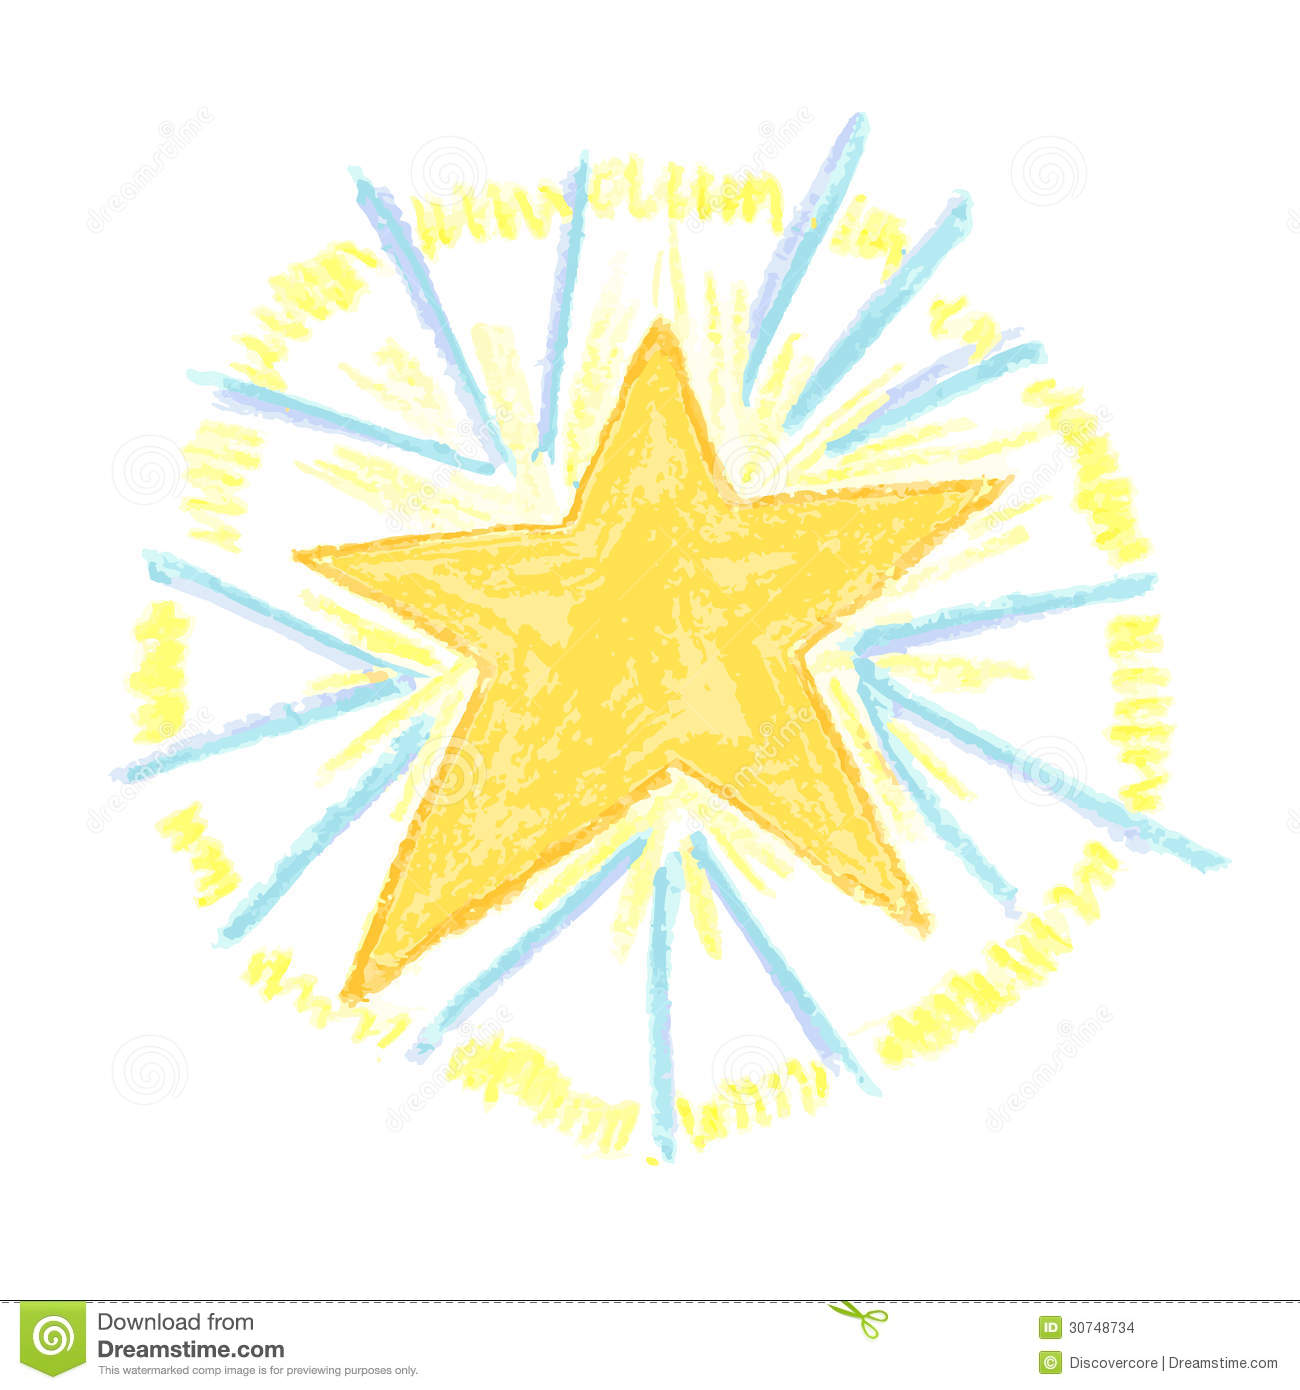 Light Airy And Fun Hand Drawn Star Burst With Crayon Characteristics